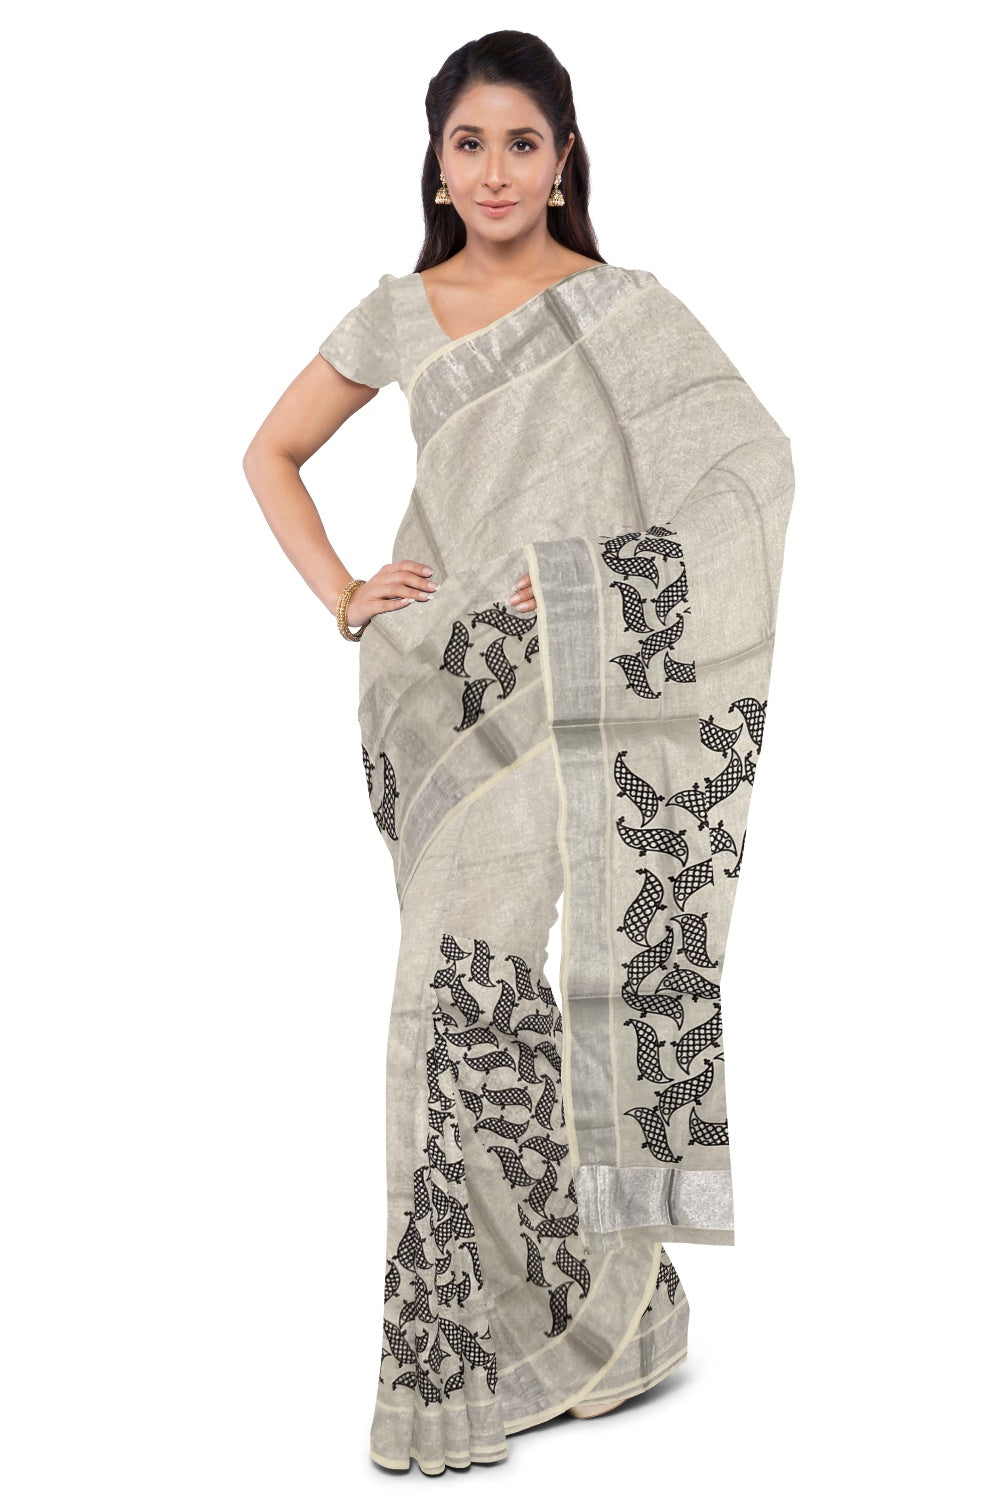 Silver Tissue Saree with Black Mural Print